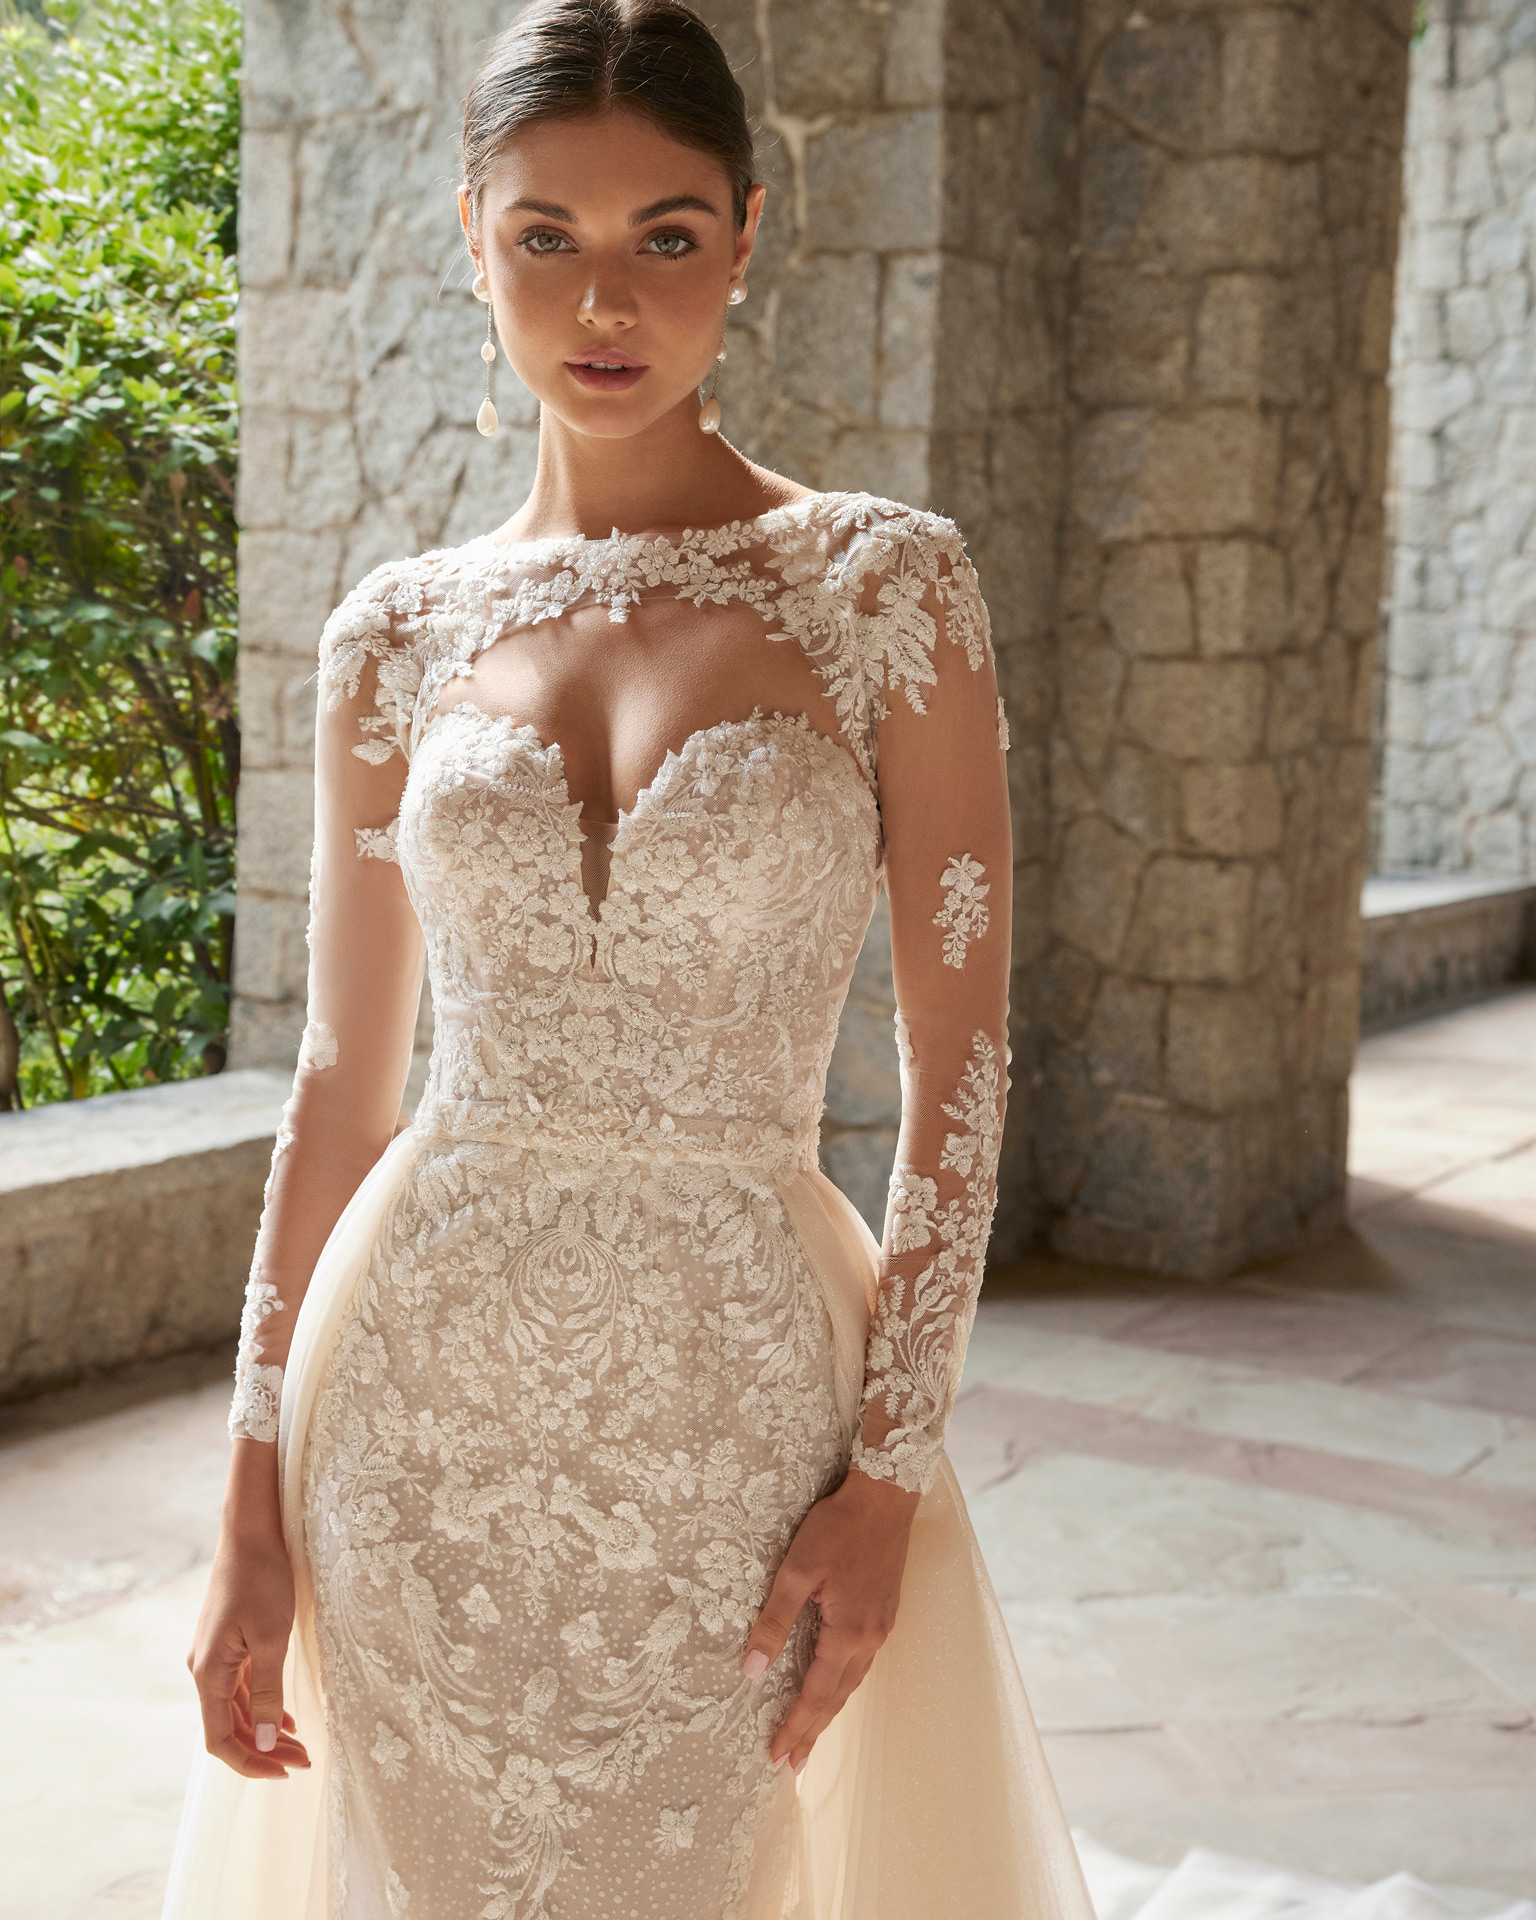 Super sexy three-piece mermaid-style wedding dress. Crafted in lace and beadwork, it features a sweetheart neckline, corset back, detachable straps, lace and beadwork jacket and an overskirt in tulle. Delight in this dreamy Luna Studio set. LUNA_NOVIAS.